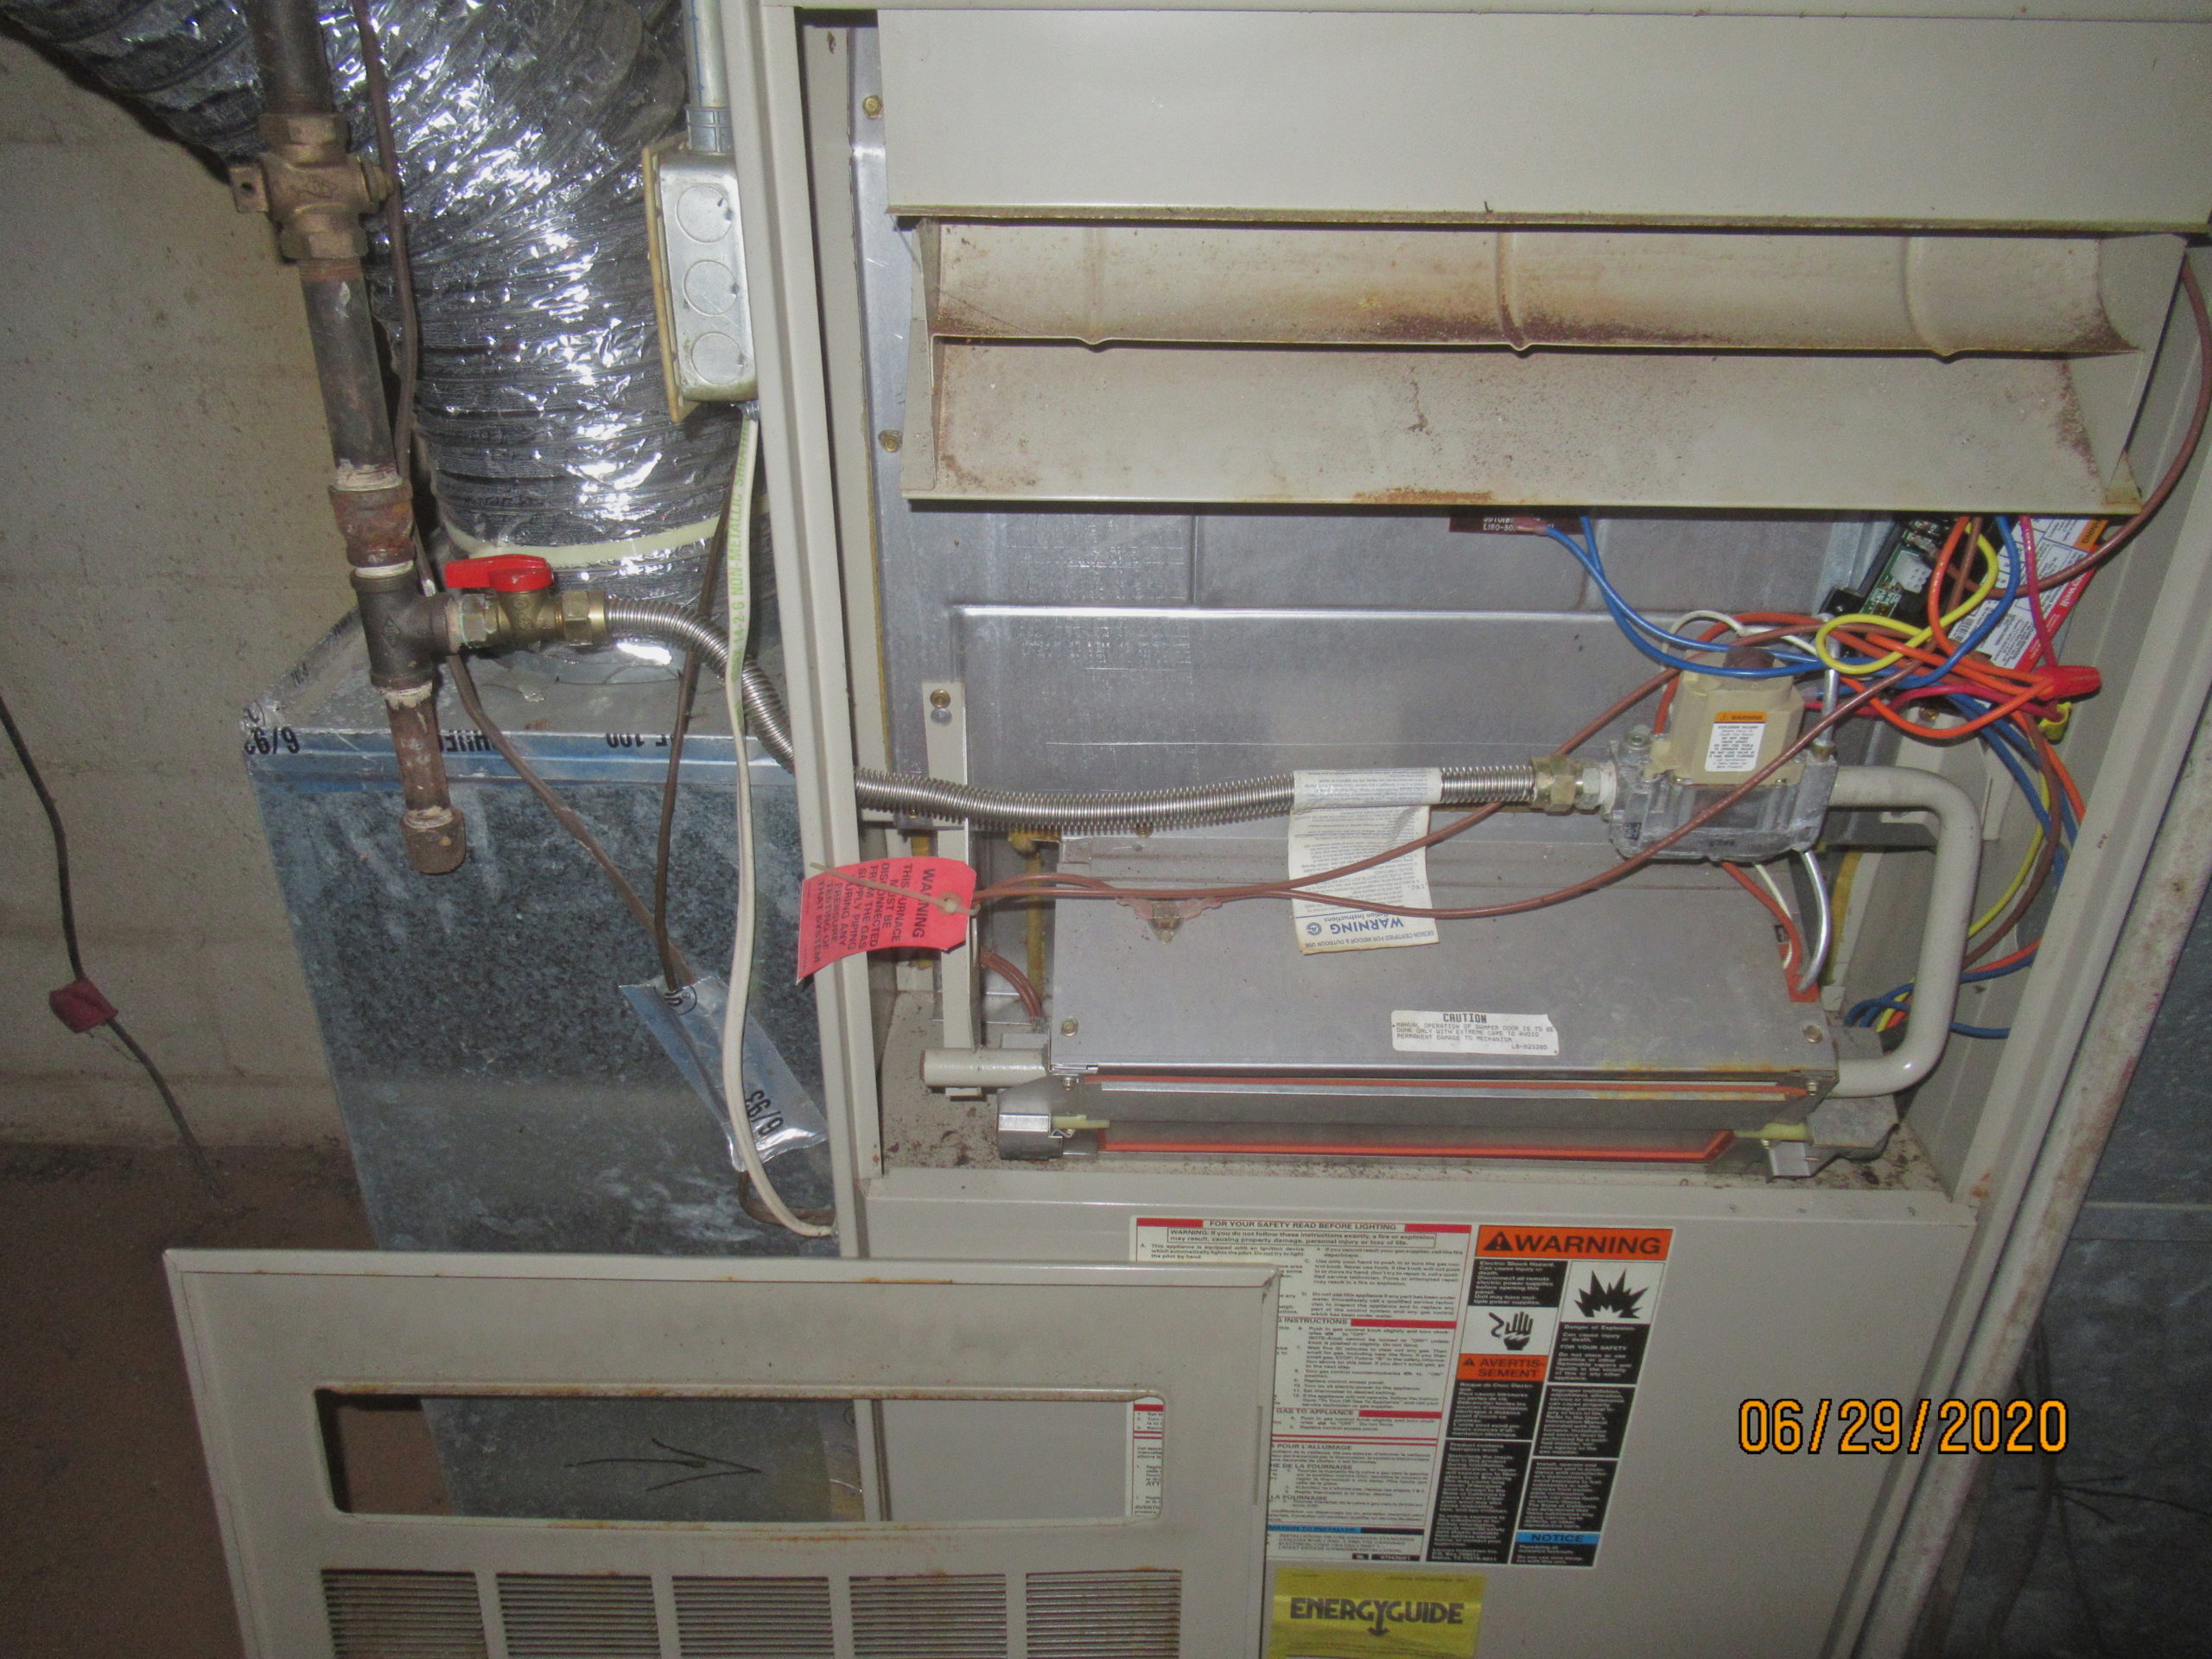 Flexible gas piping in cabinet